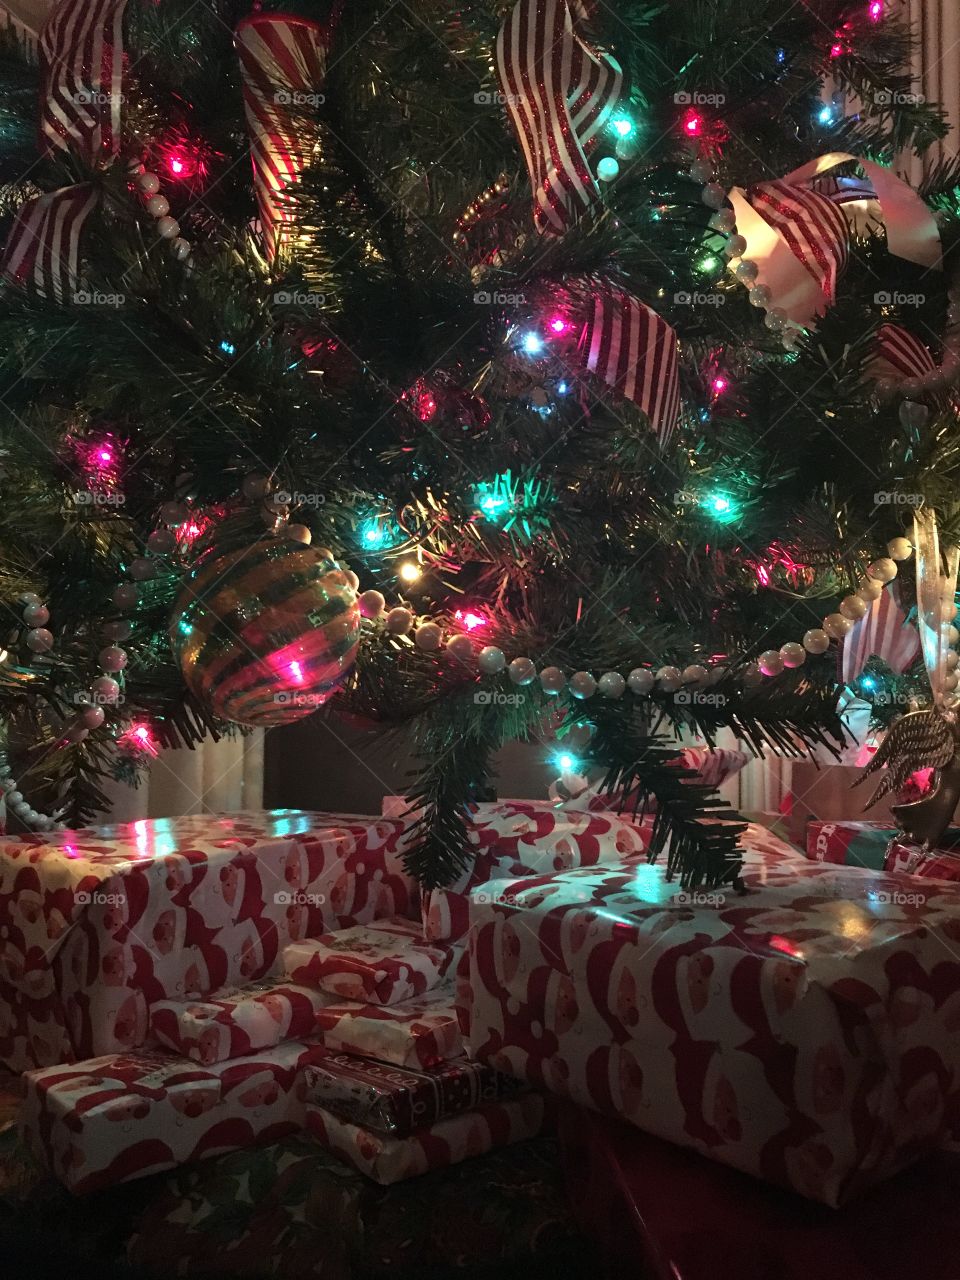 Presents under The Christmas Tree